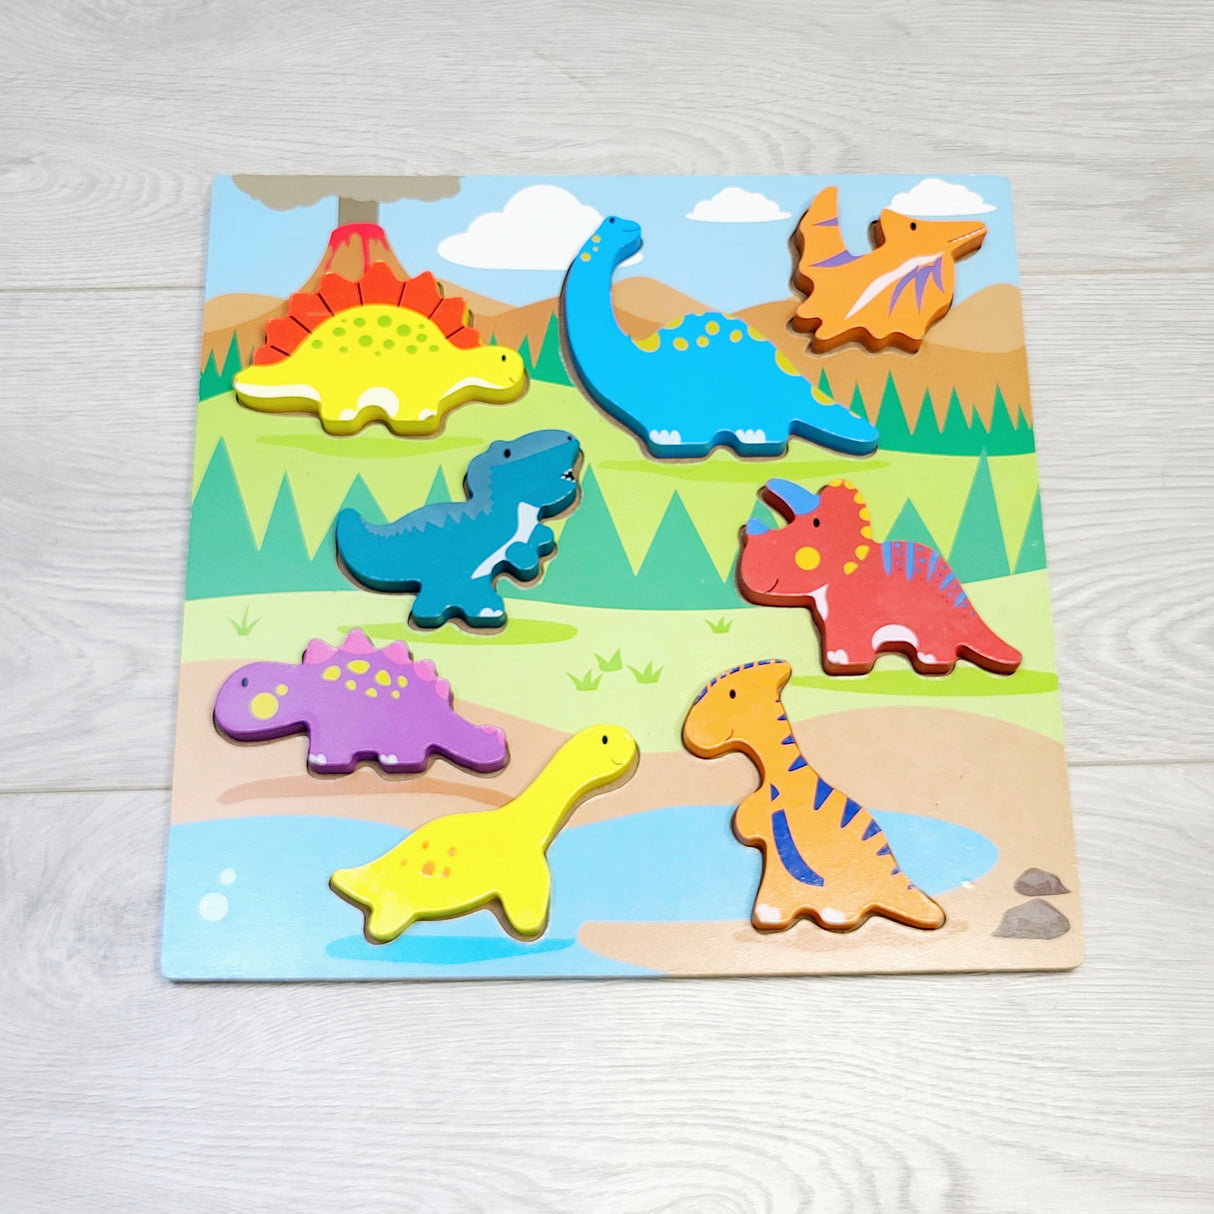 JHTC3 - Wooden dinosaur chunky puzzle